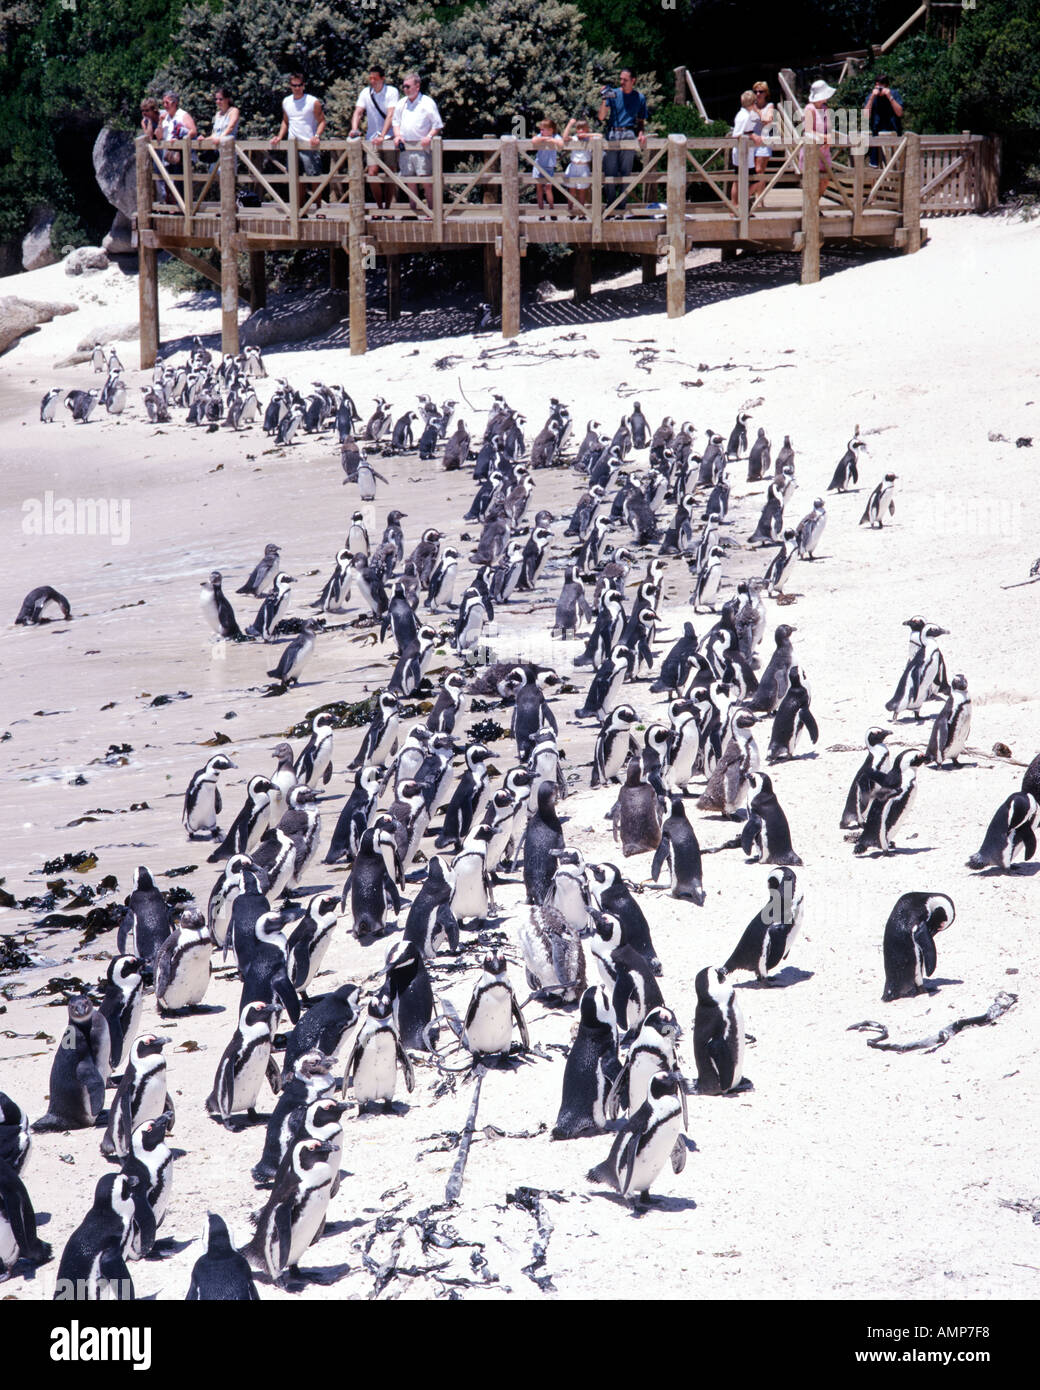 Jackass penguins (Sphenicus demersis), also known as African penguins, on Boulders Beach in Cape Town South Africa. Stock Photo